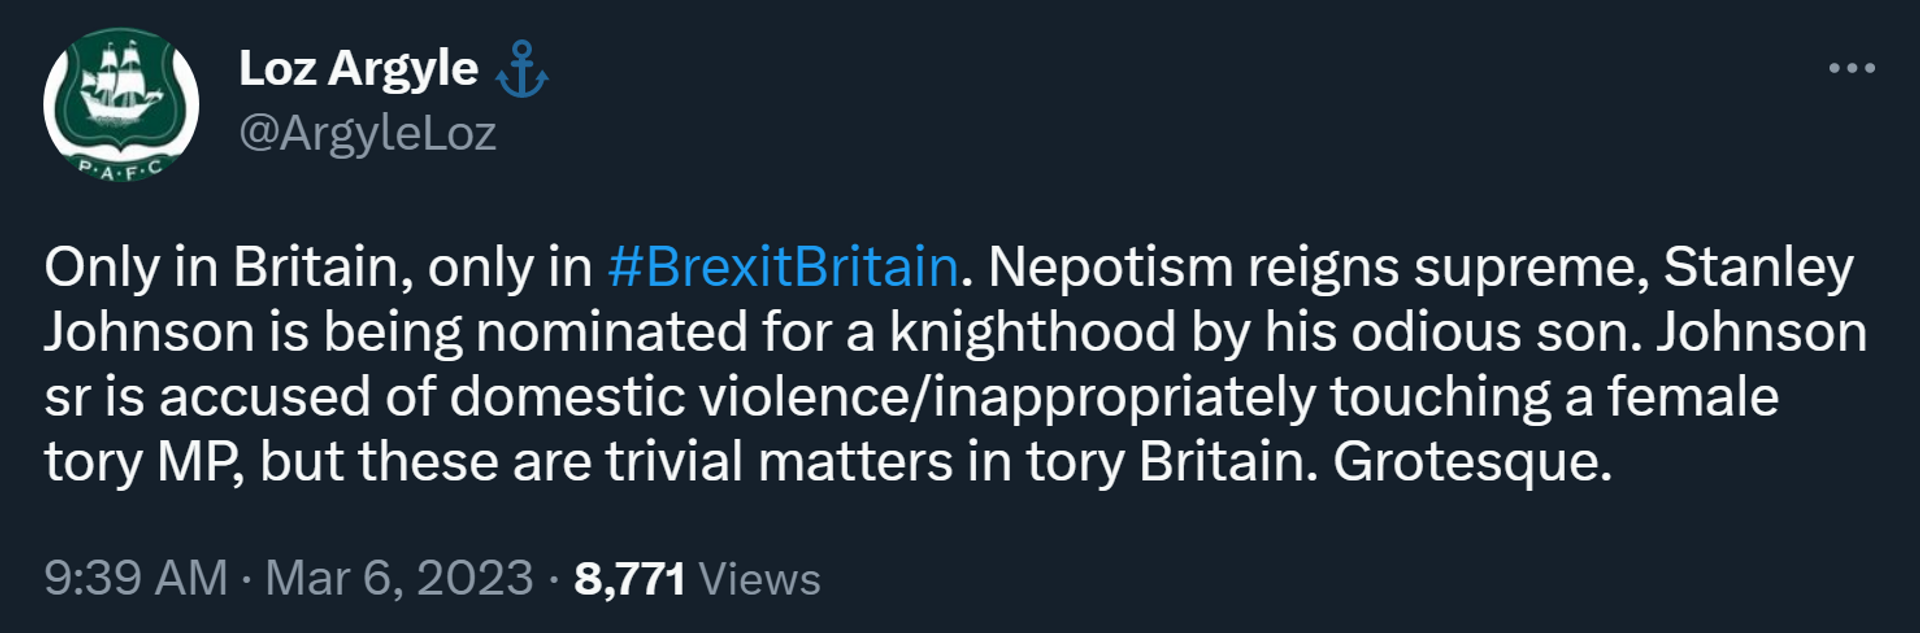 An angry tweet about unconfirmed reports former British prime minister Boris Johnson has nominated his own father for a knighthood. - Sputnik International, 1920, 06.03.2023